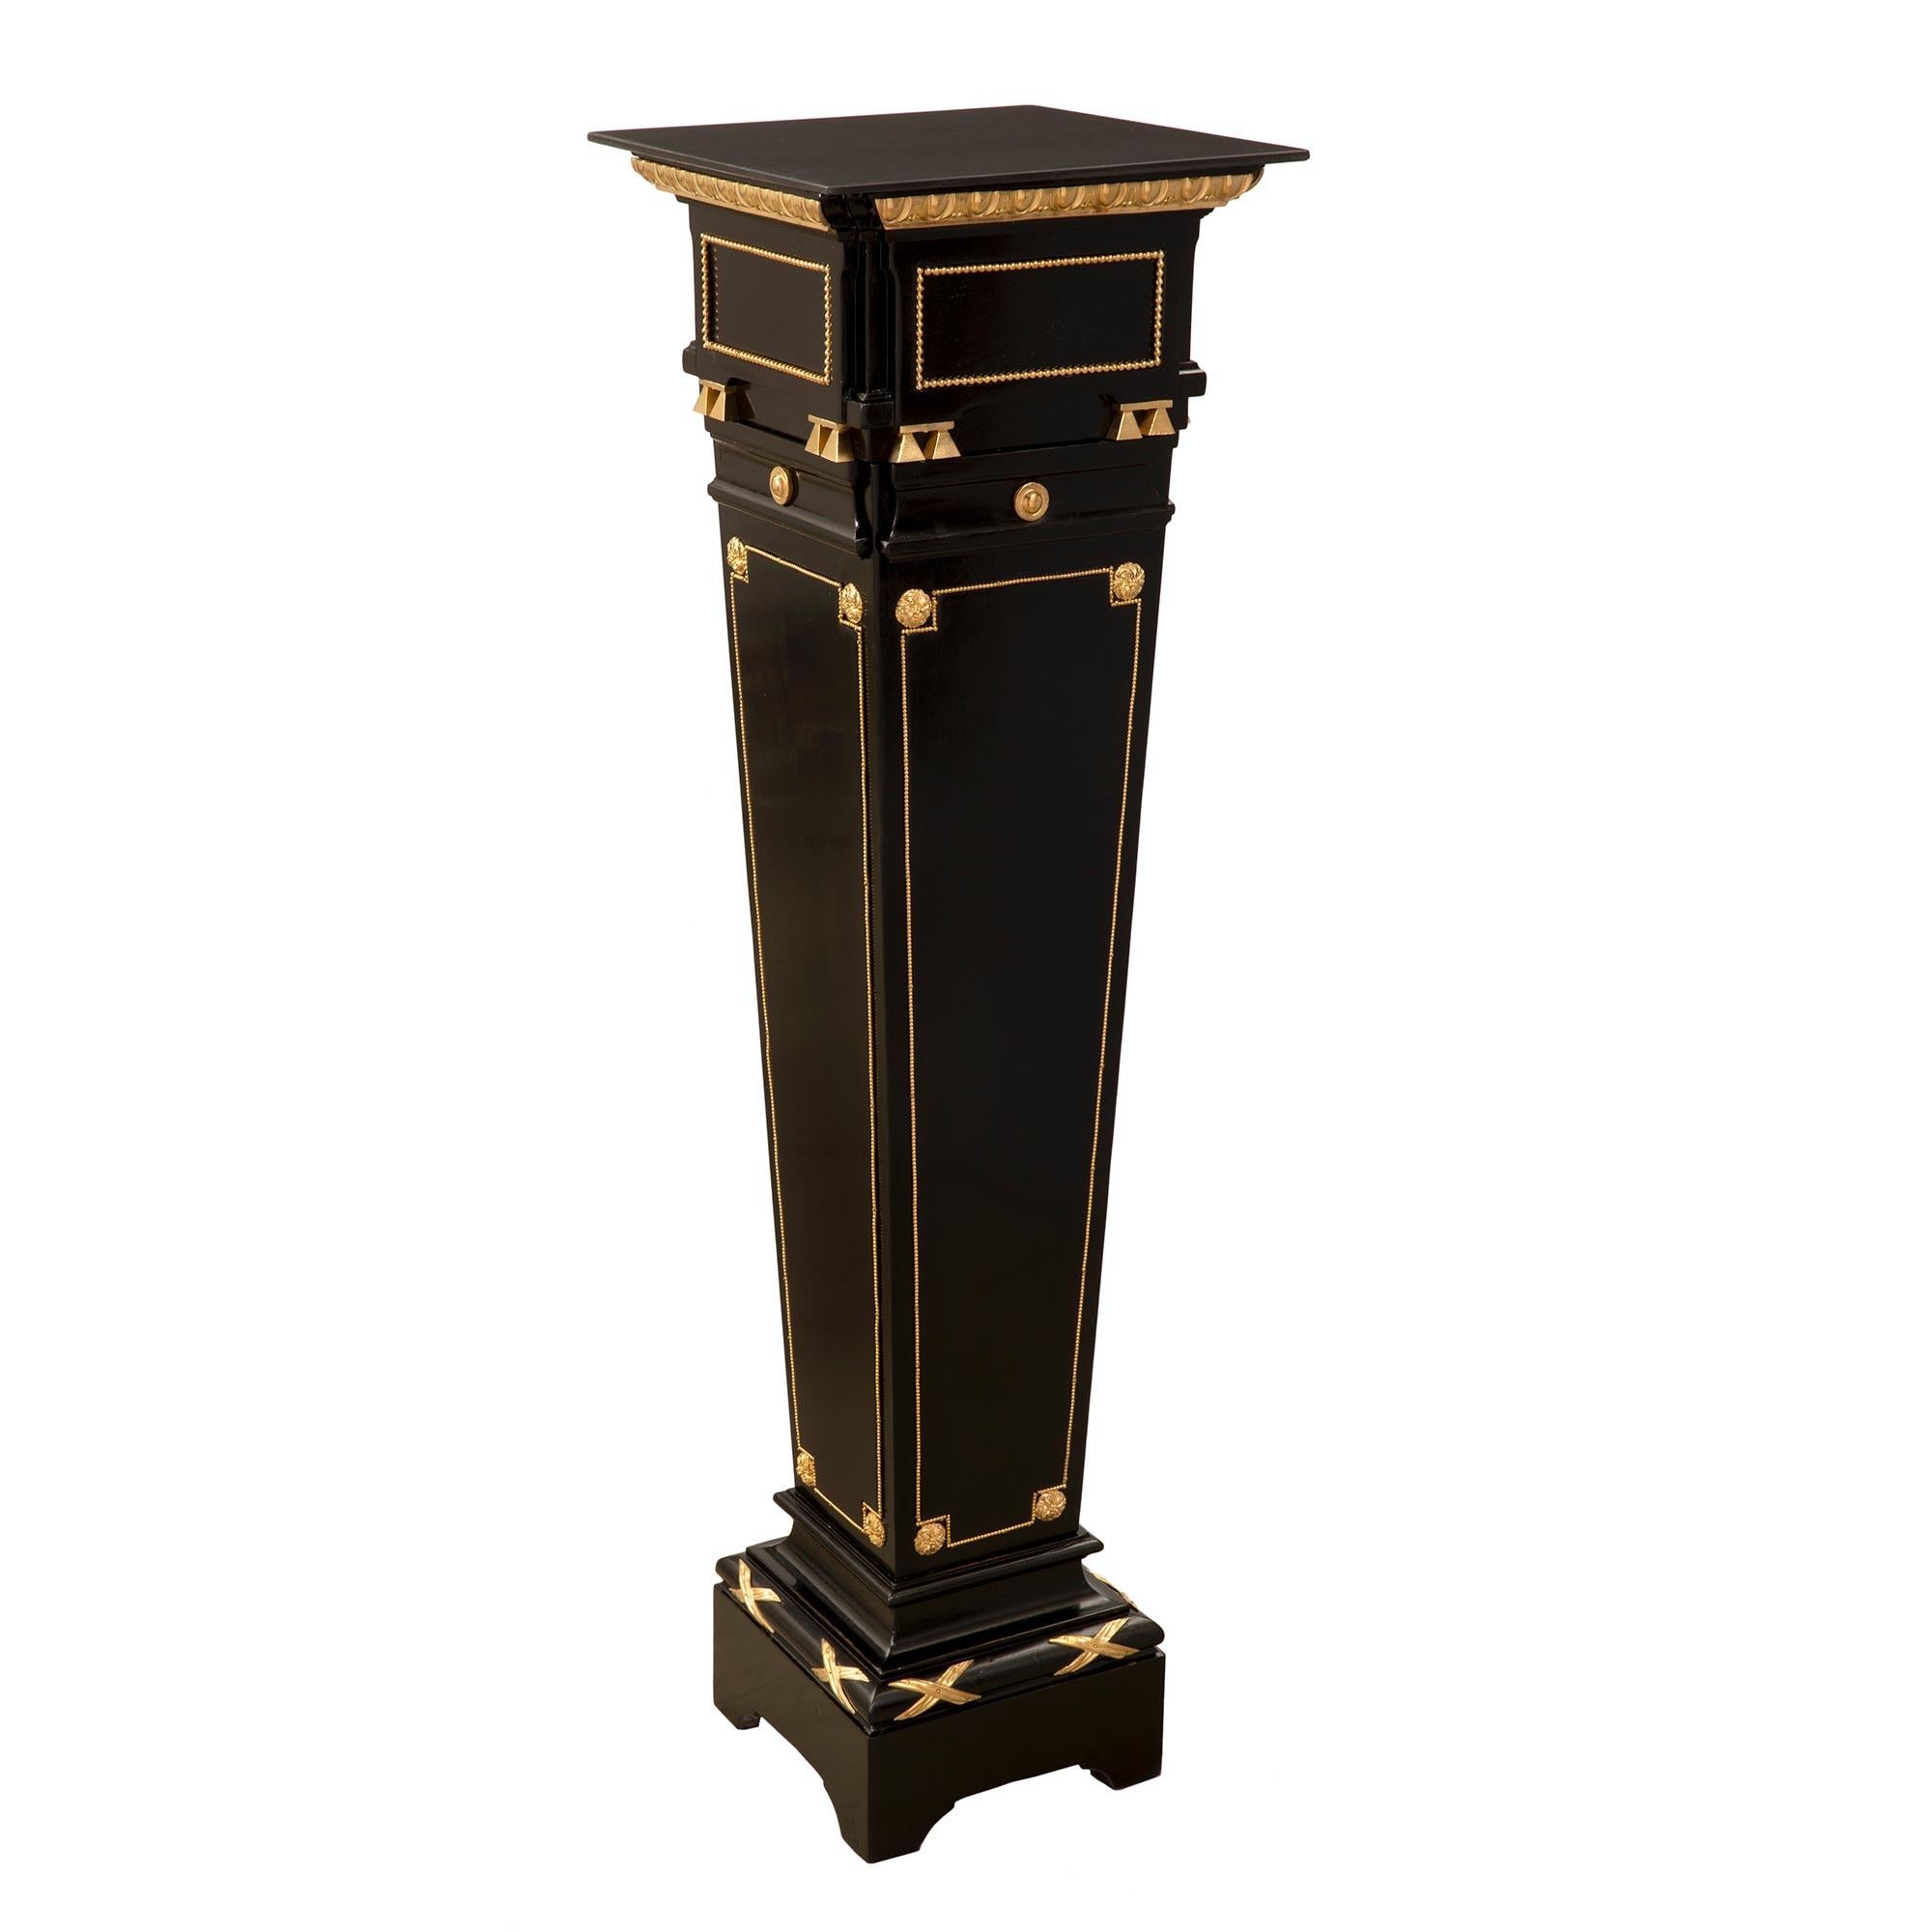 A most elegant pair of French mid 19th century Louis XVI st. Napoleon III period ebony, ormolu and black Belgian marble pedestals. The pair are raised by square bases with 'X' shaped ormolu mounts. Above are the tapered columns with central recessed